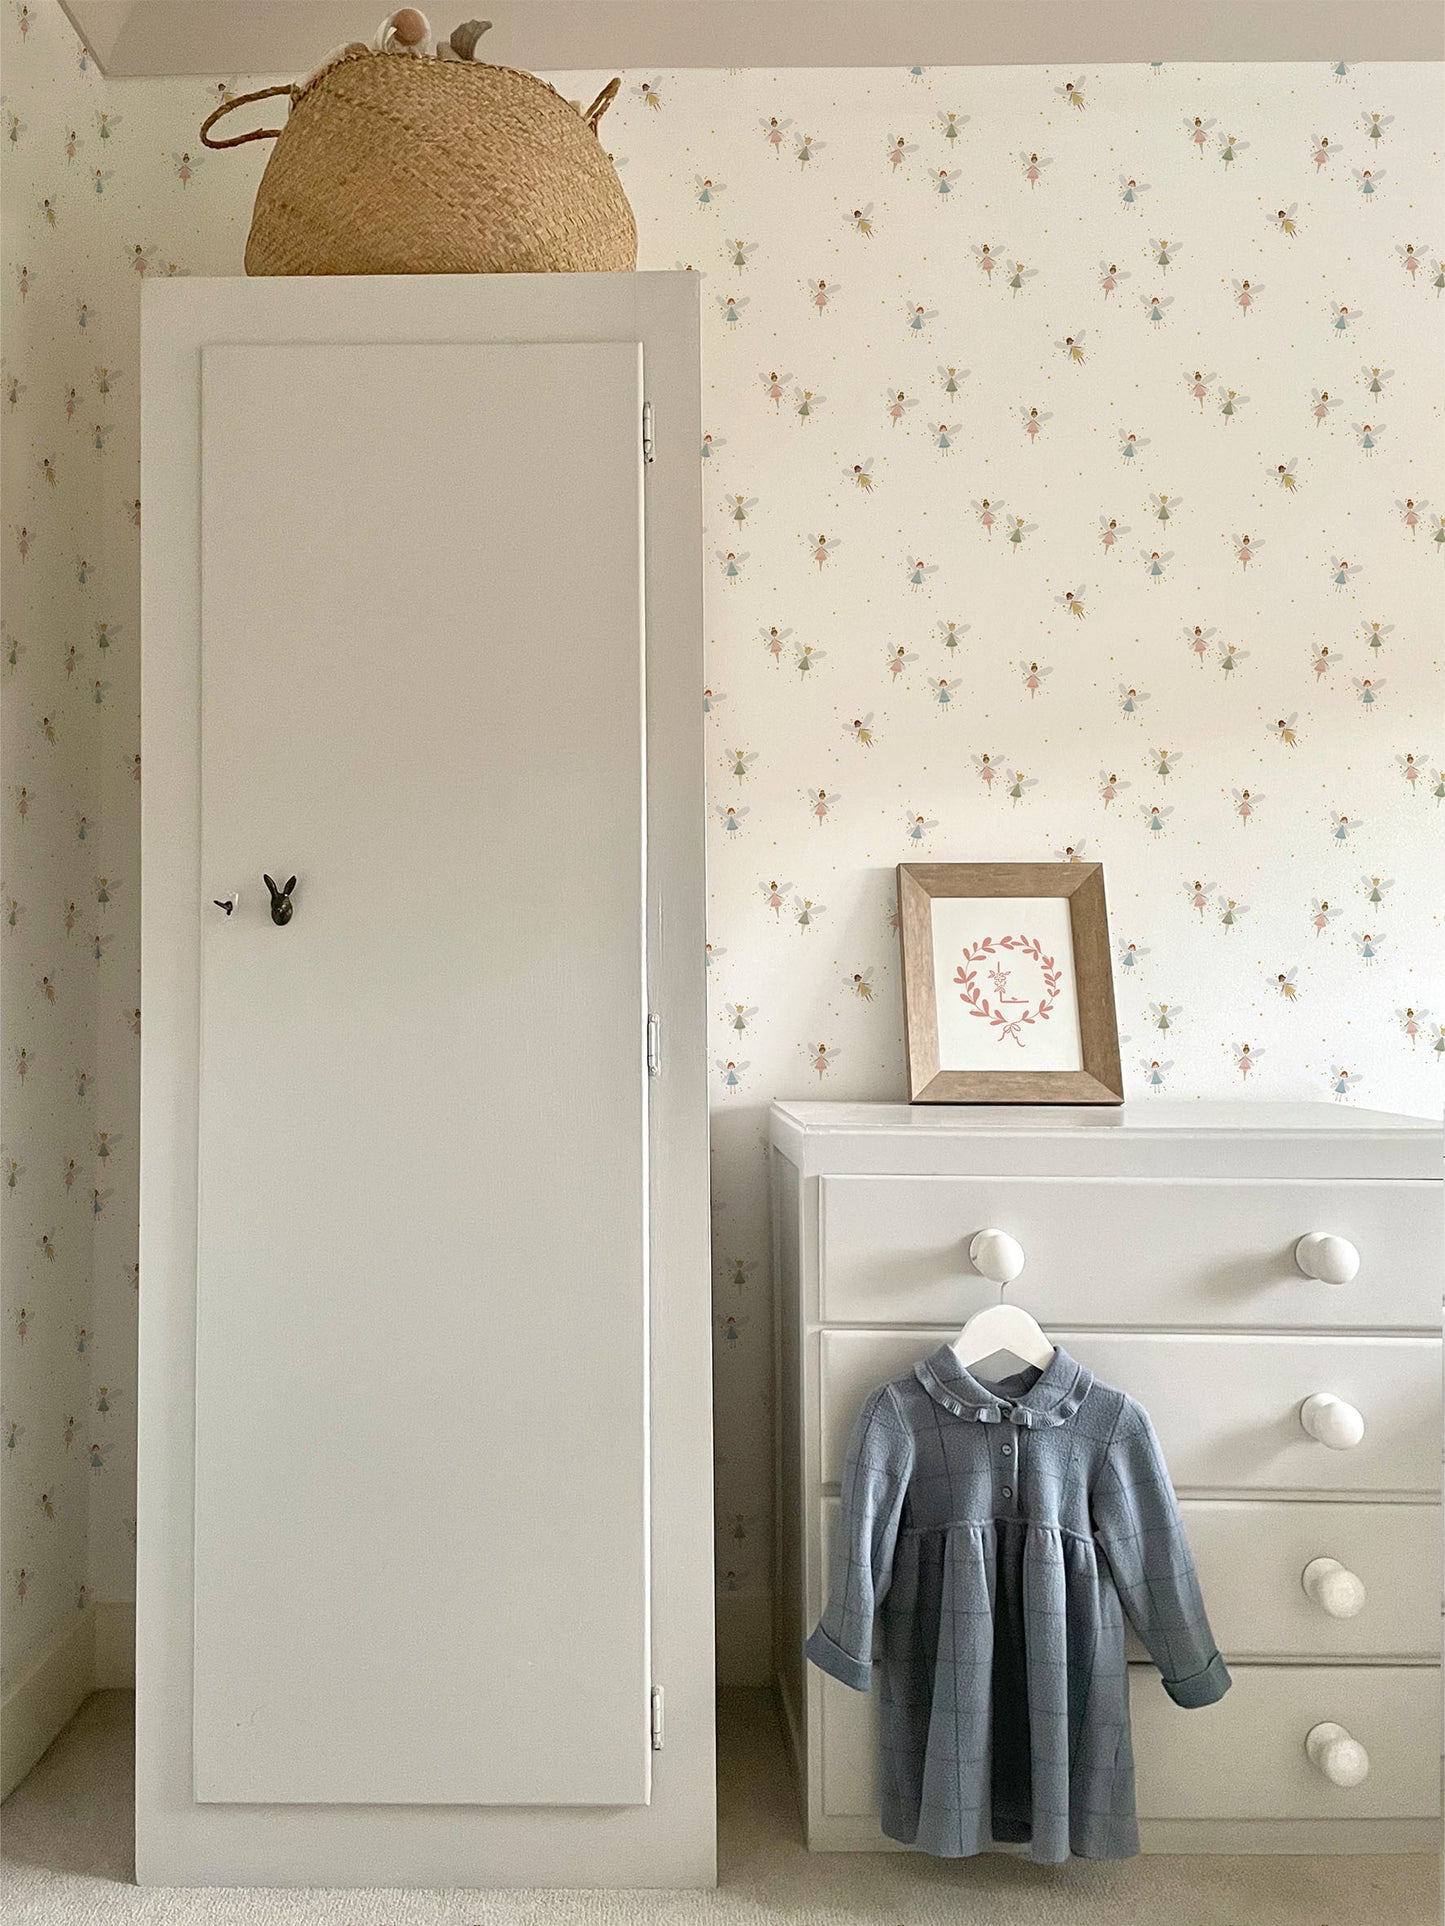 Girls bedroom with Fairy Dust luxury children's wallpaper, pale blue painted nursery furniture and blue girls dress